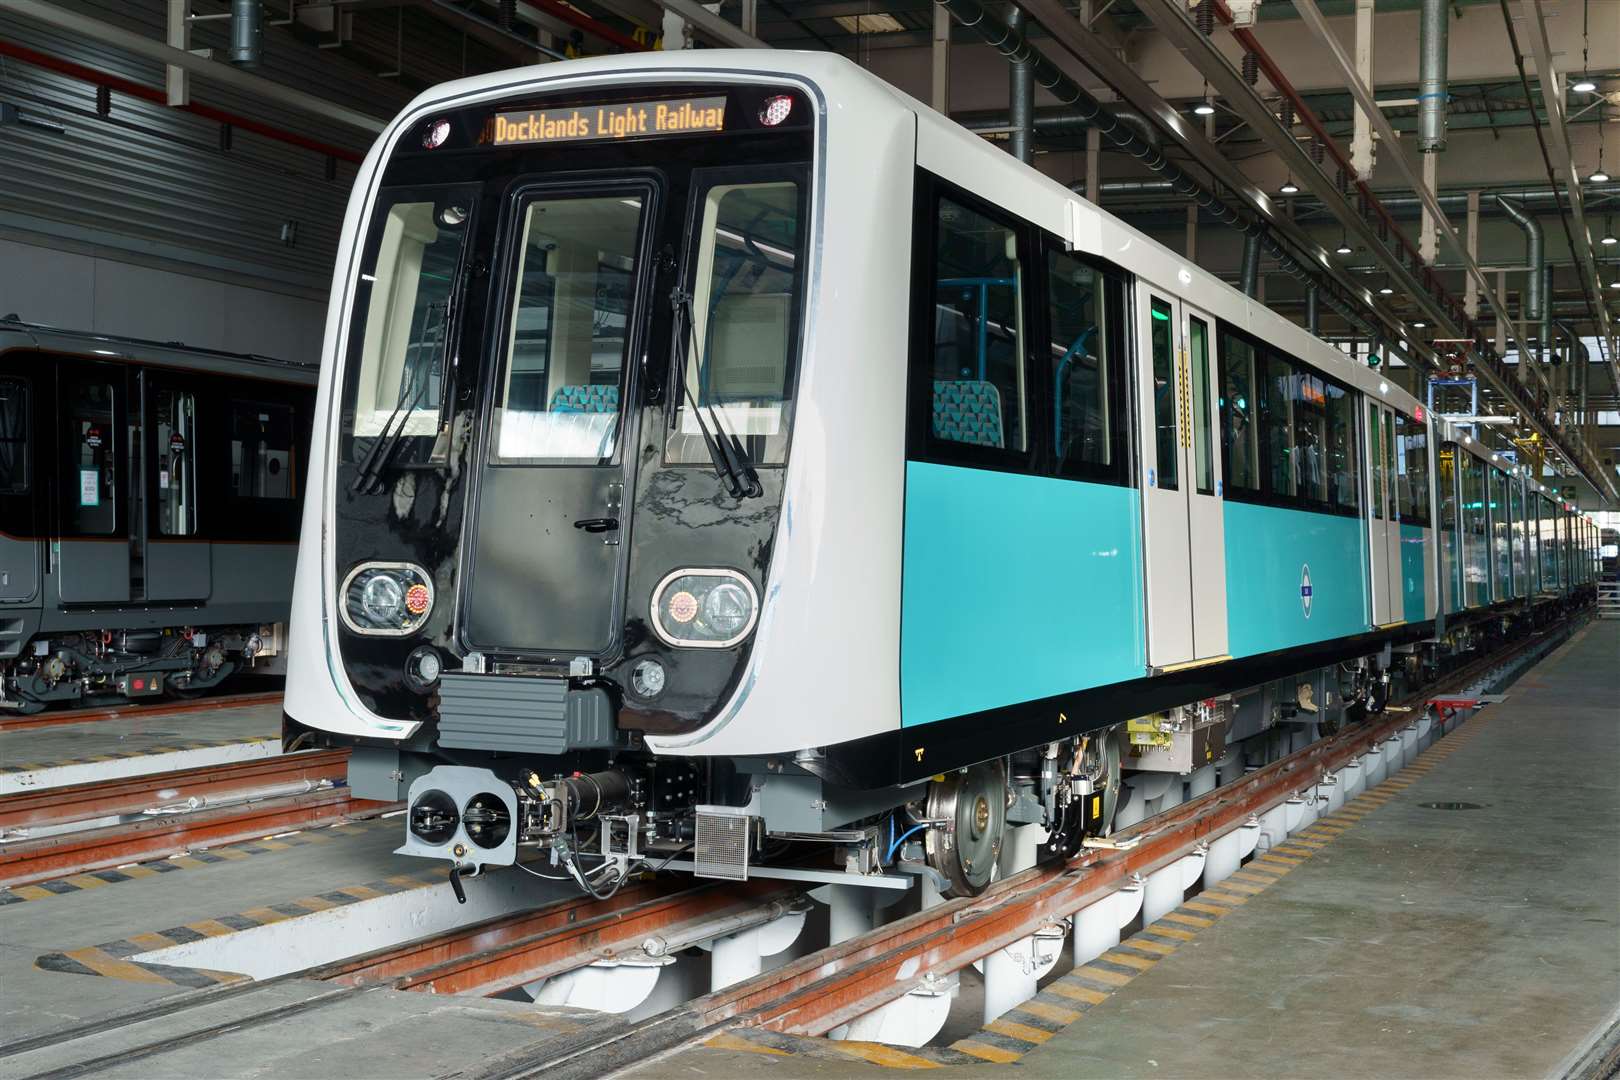 The new-look DLR trains have been unveiled